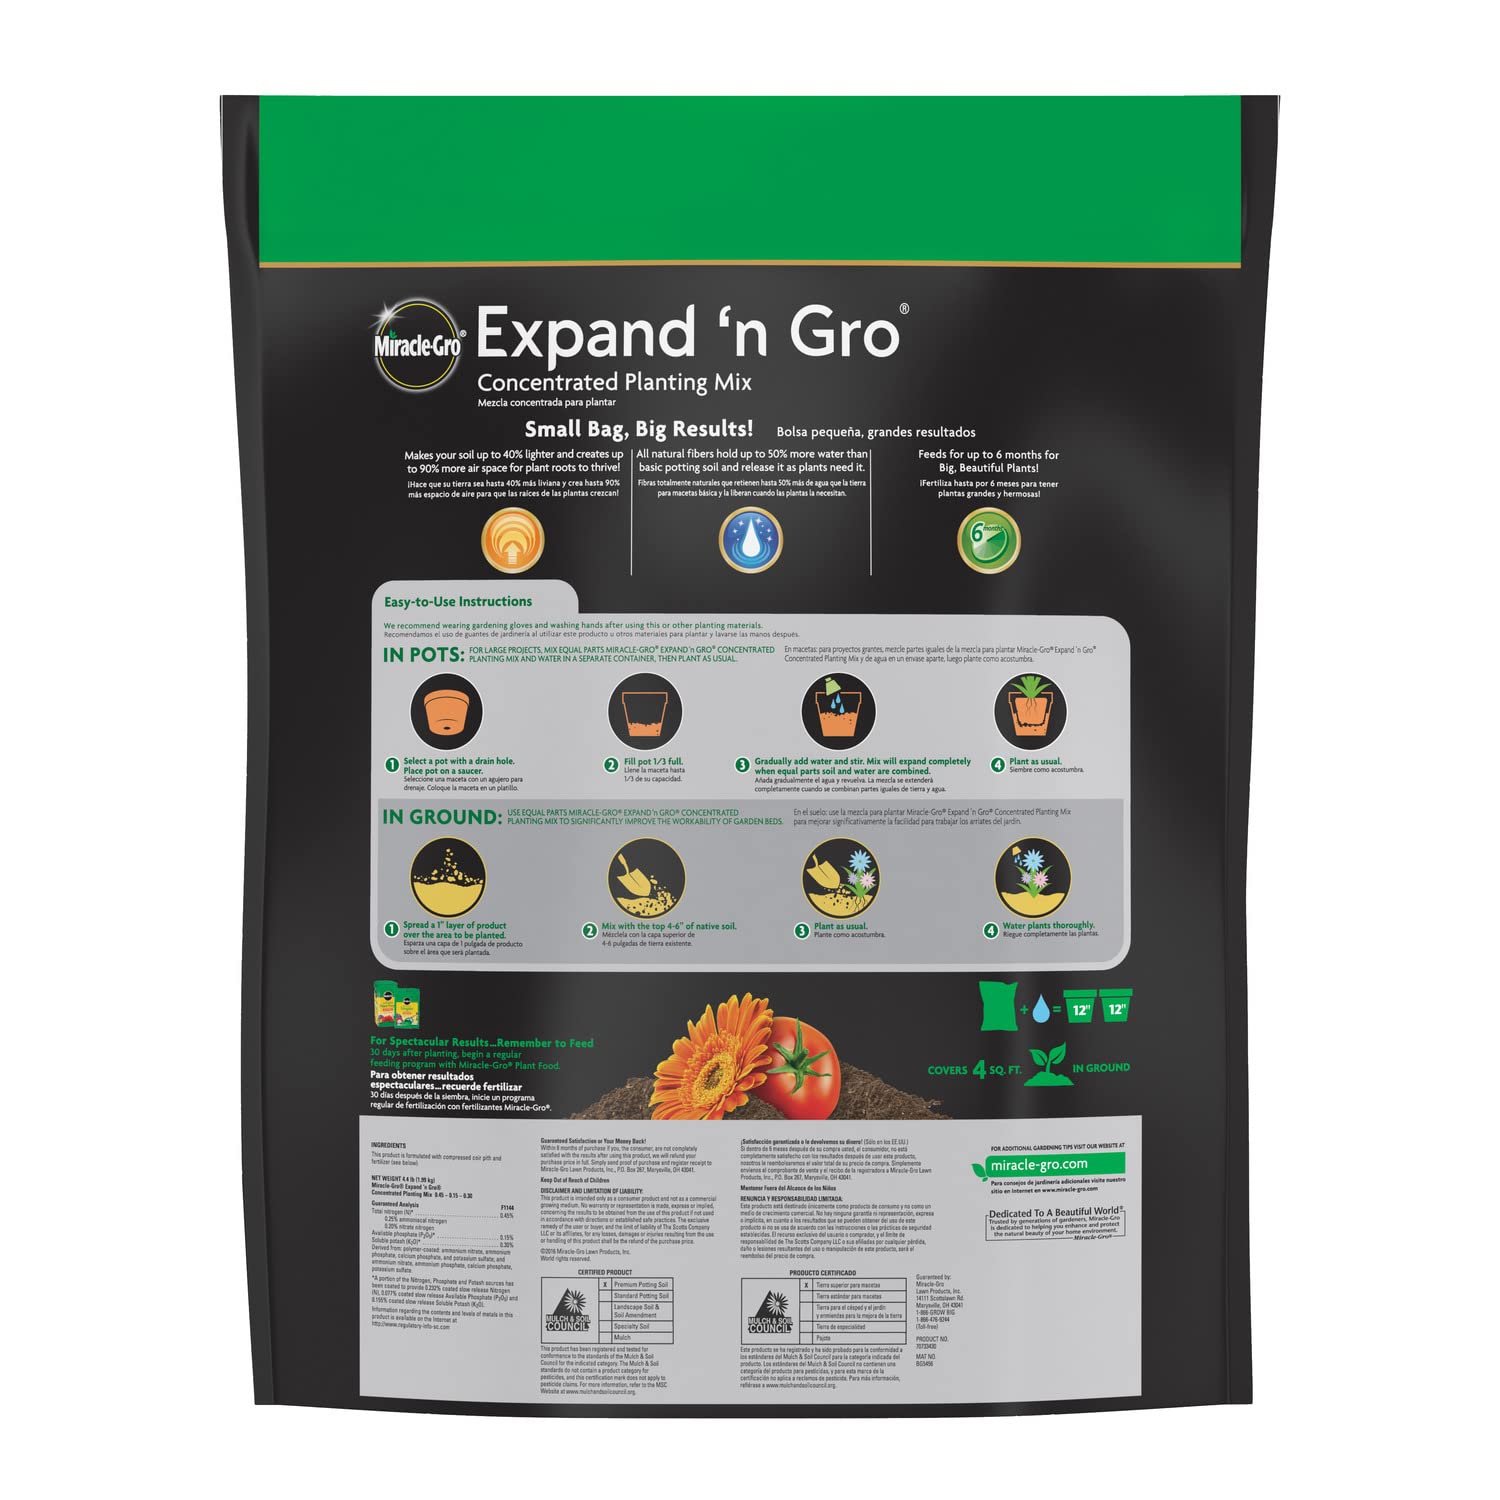 Miracle-Gro Expand 'n Gro Concentrated Planting Mix 0.33 CF - Plantonio